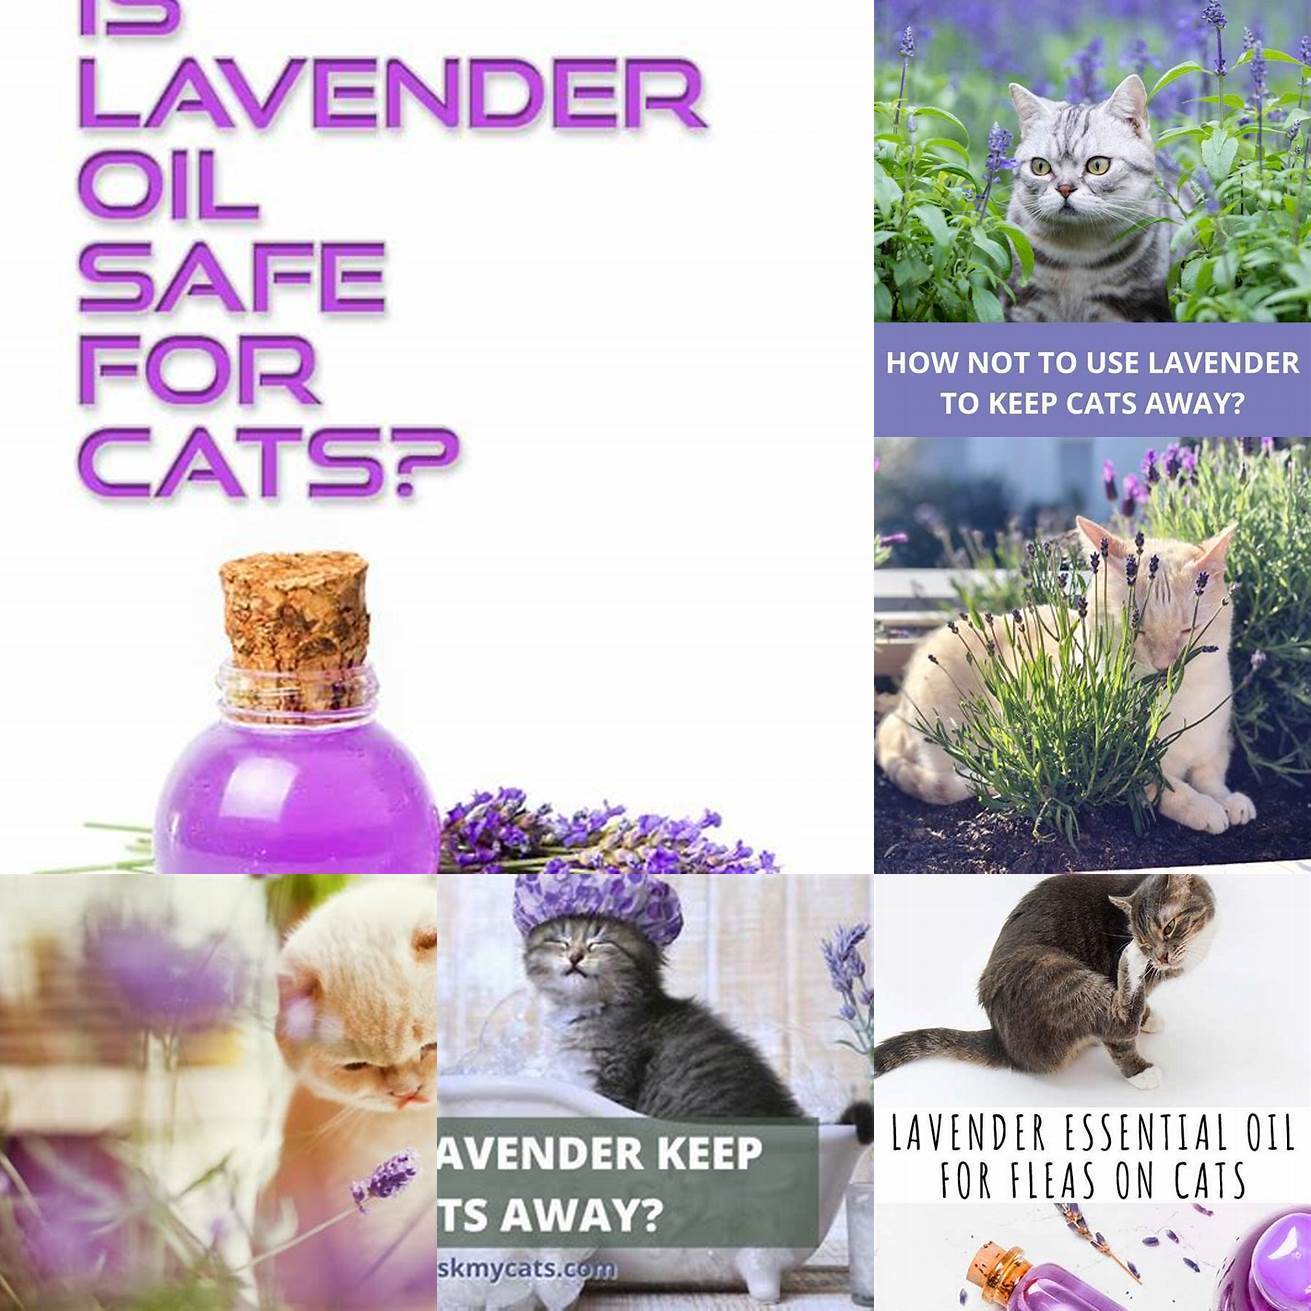 Use lavender in moderation